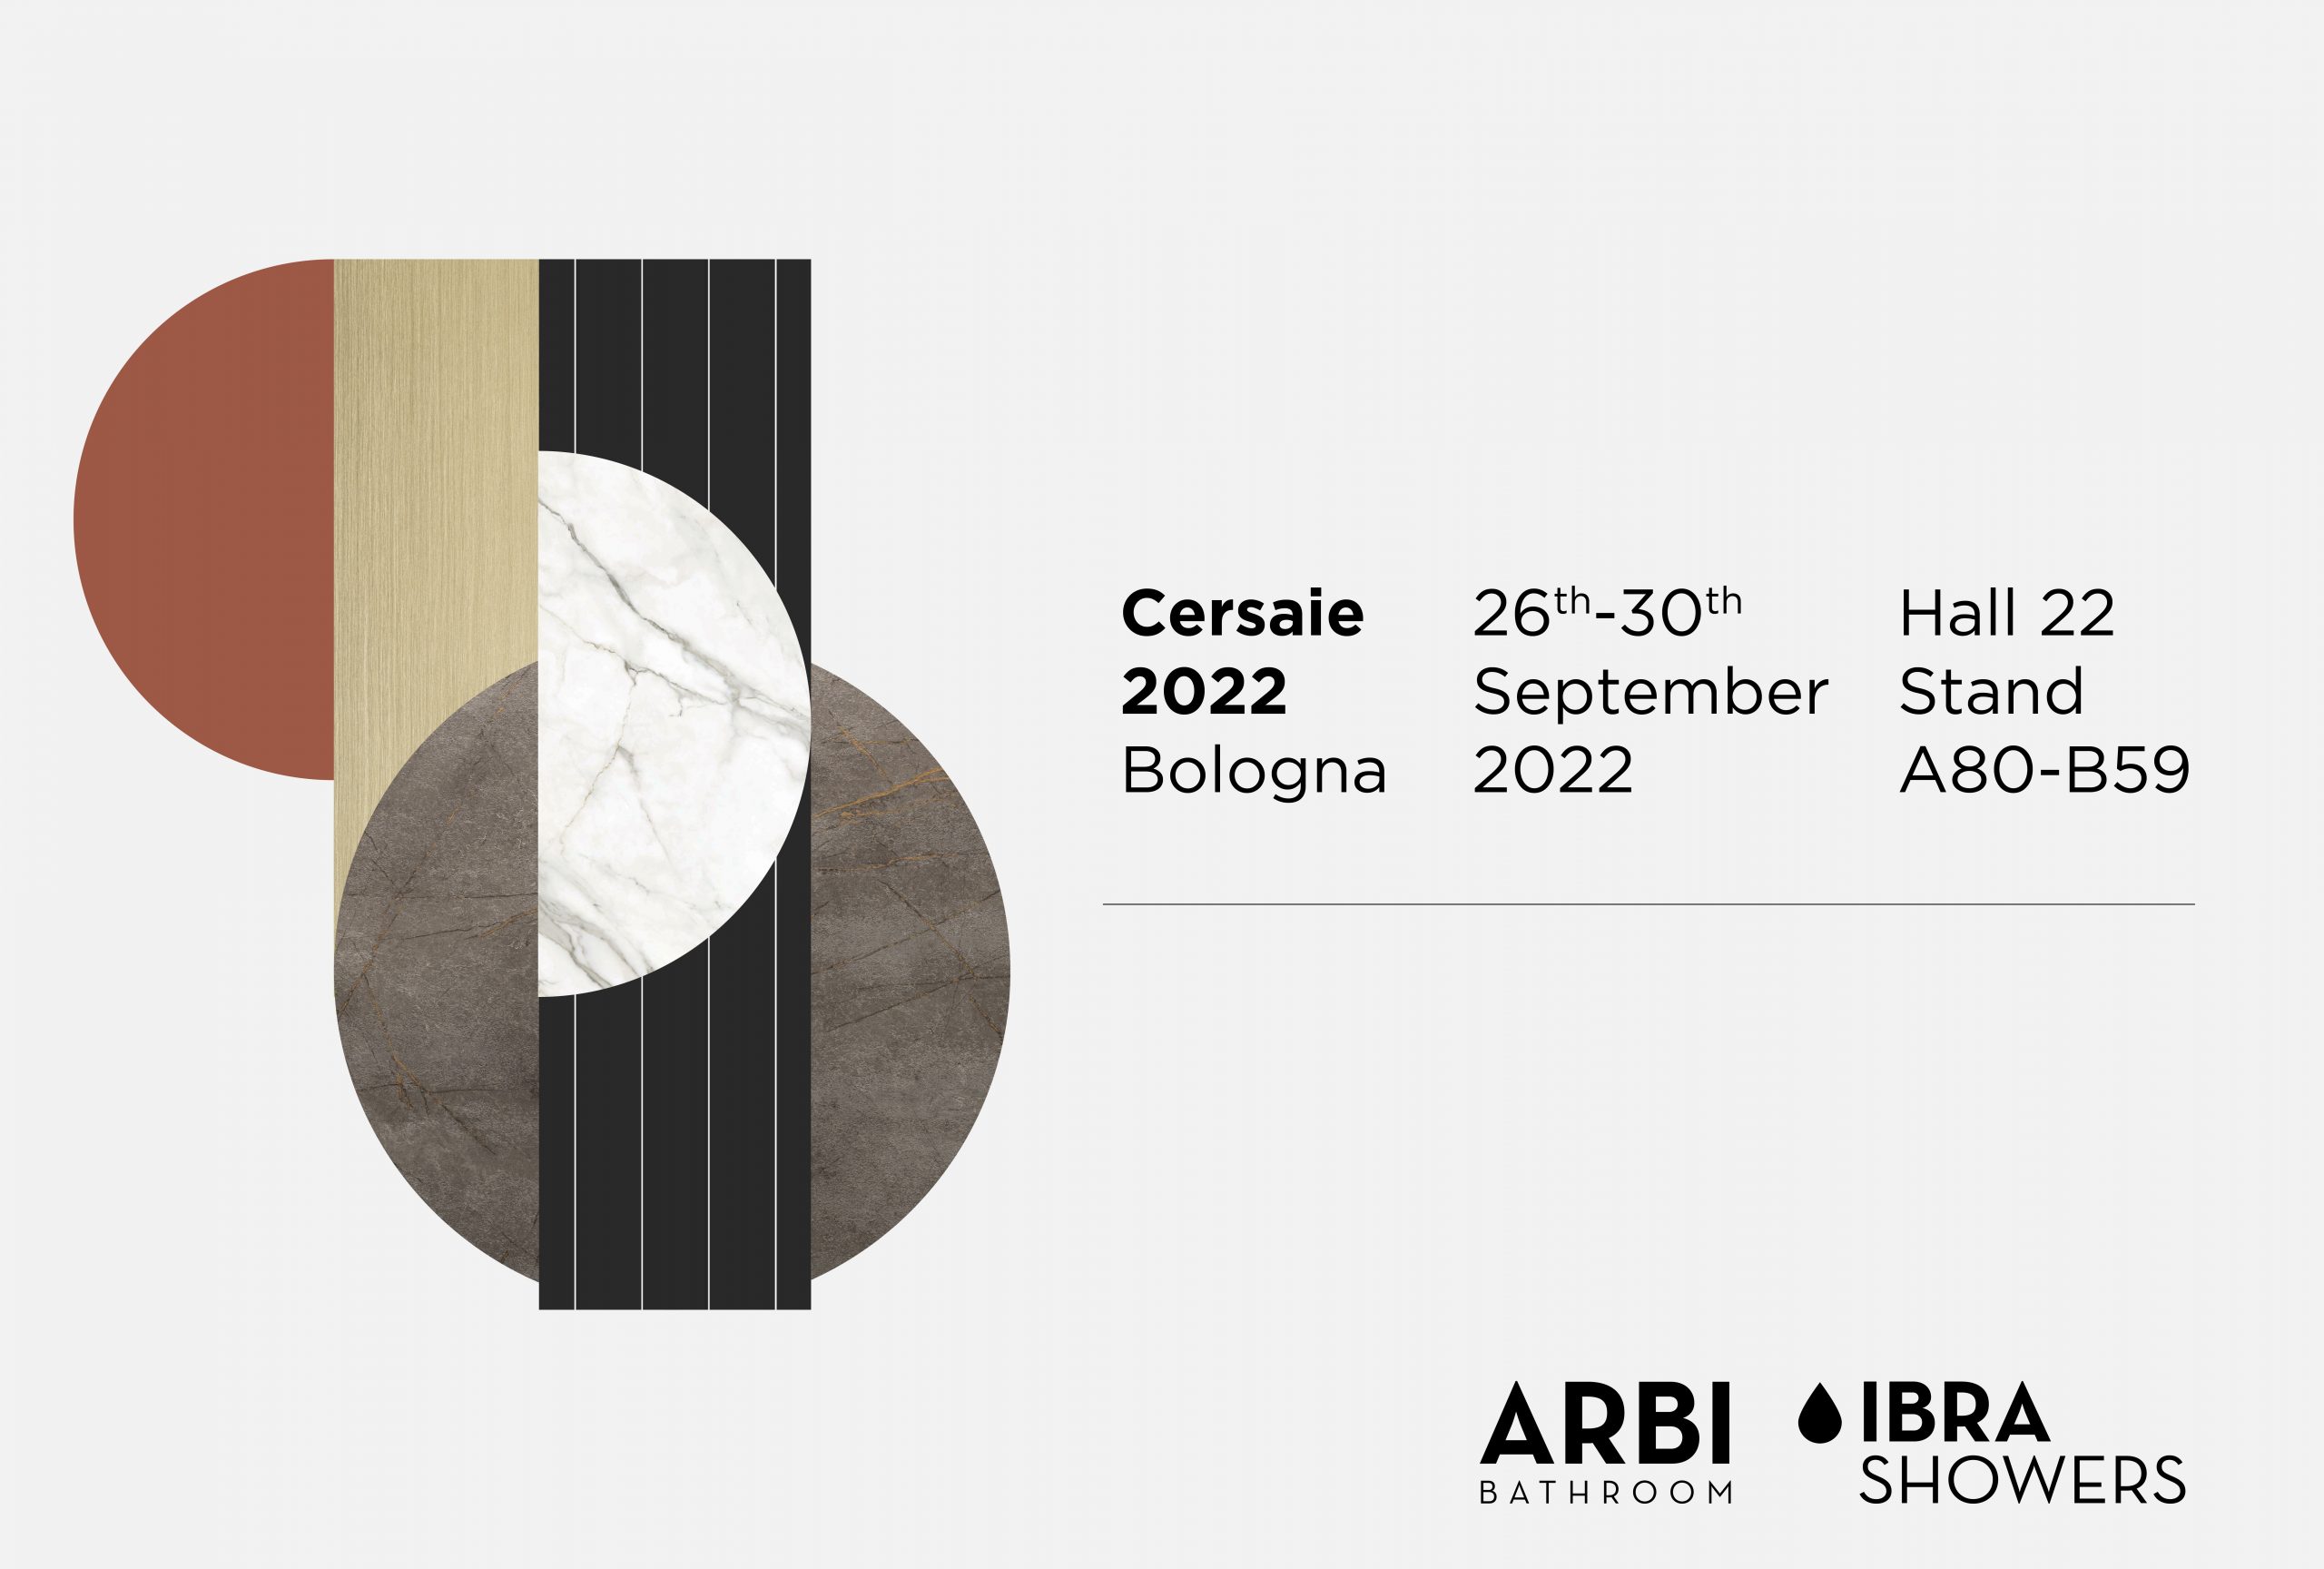 https://www.arbiarredobagno.it/wp-content/uploads/2022/07/homepage-Cersaie-scaled.jpg